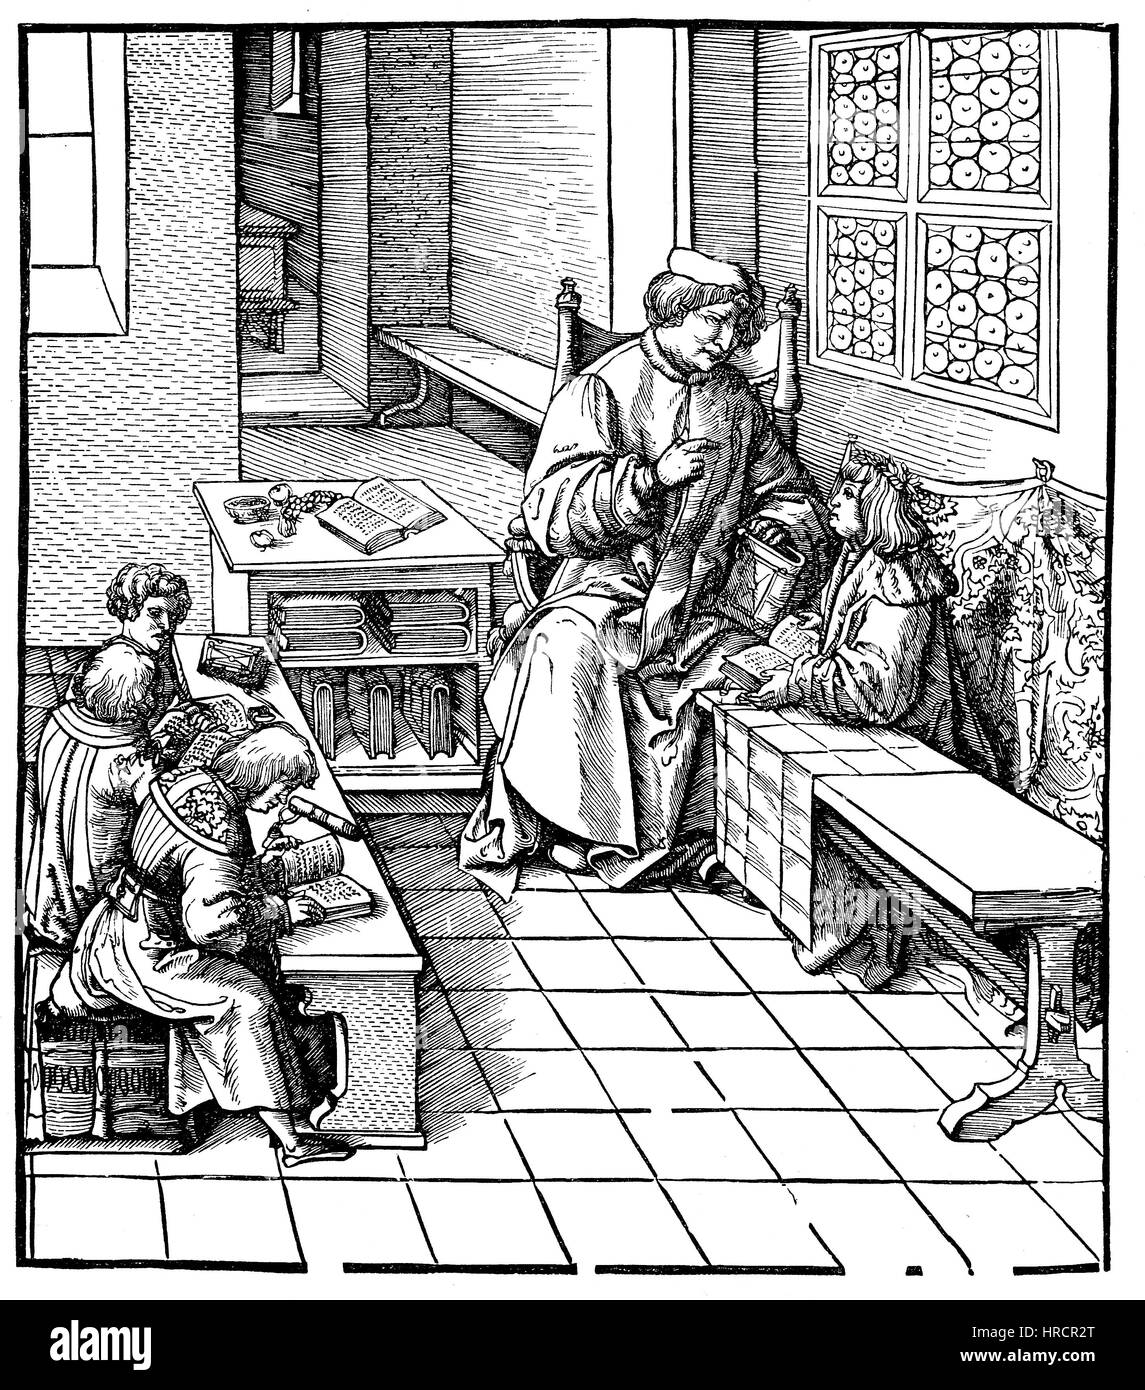 Maximilian receives lessons, facsimile of a woodcut, illustrated by Hans Burgkmair, 1473-1531, Germany, Maximilian I., 1459 - 1519, reproduction of an woodcut from the 19th century, 1885 Stock Photo